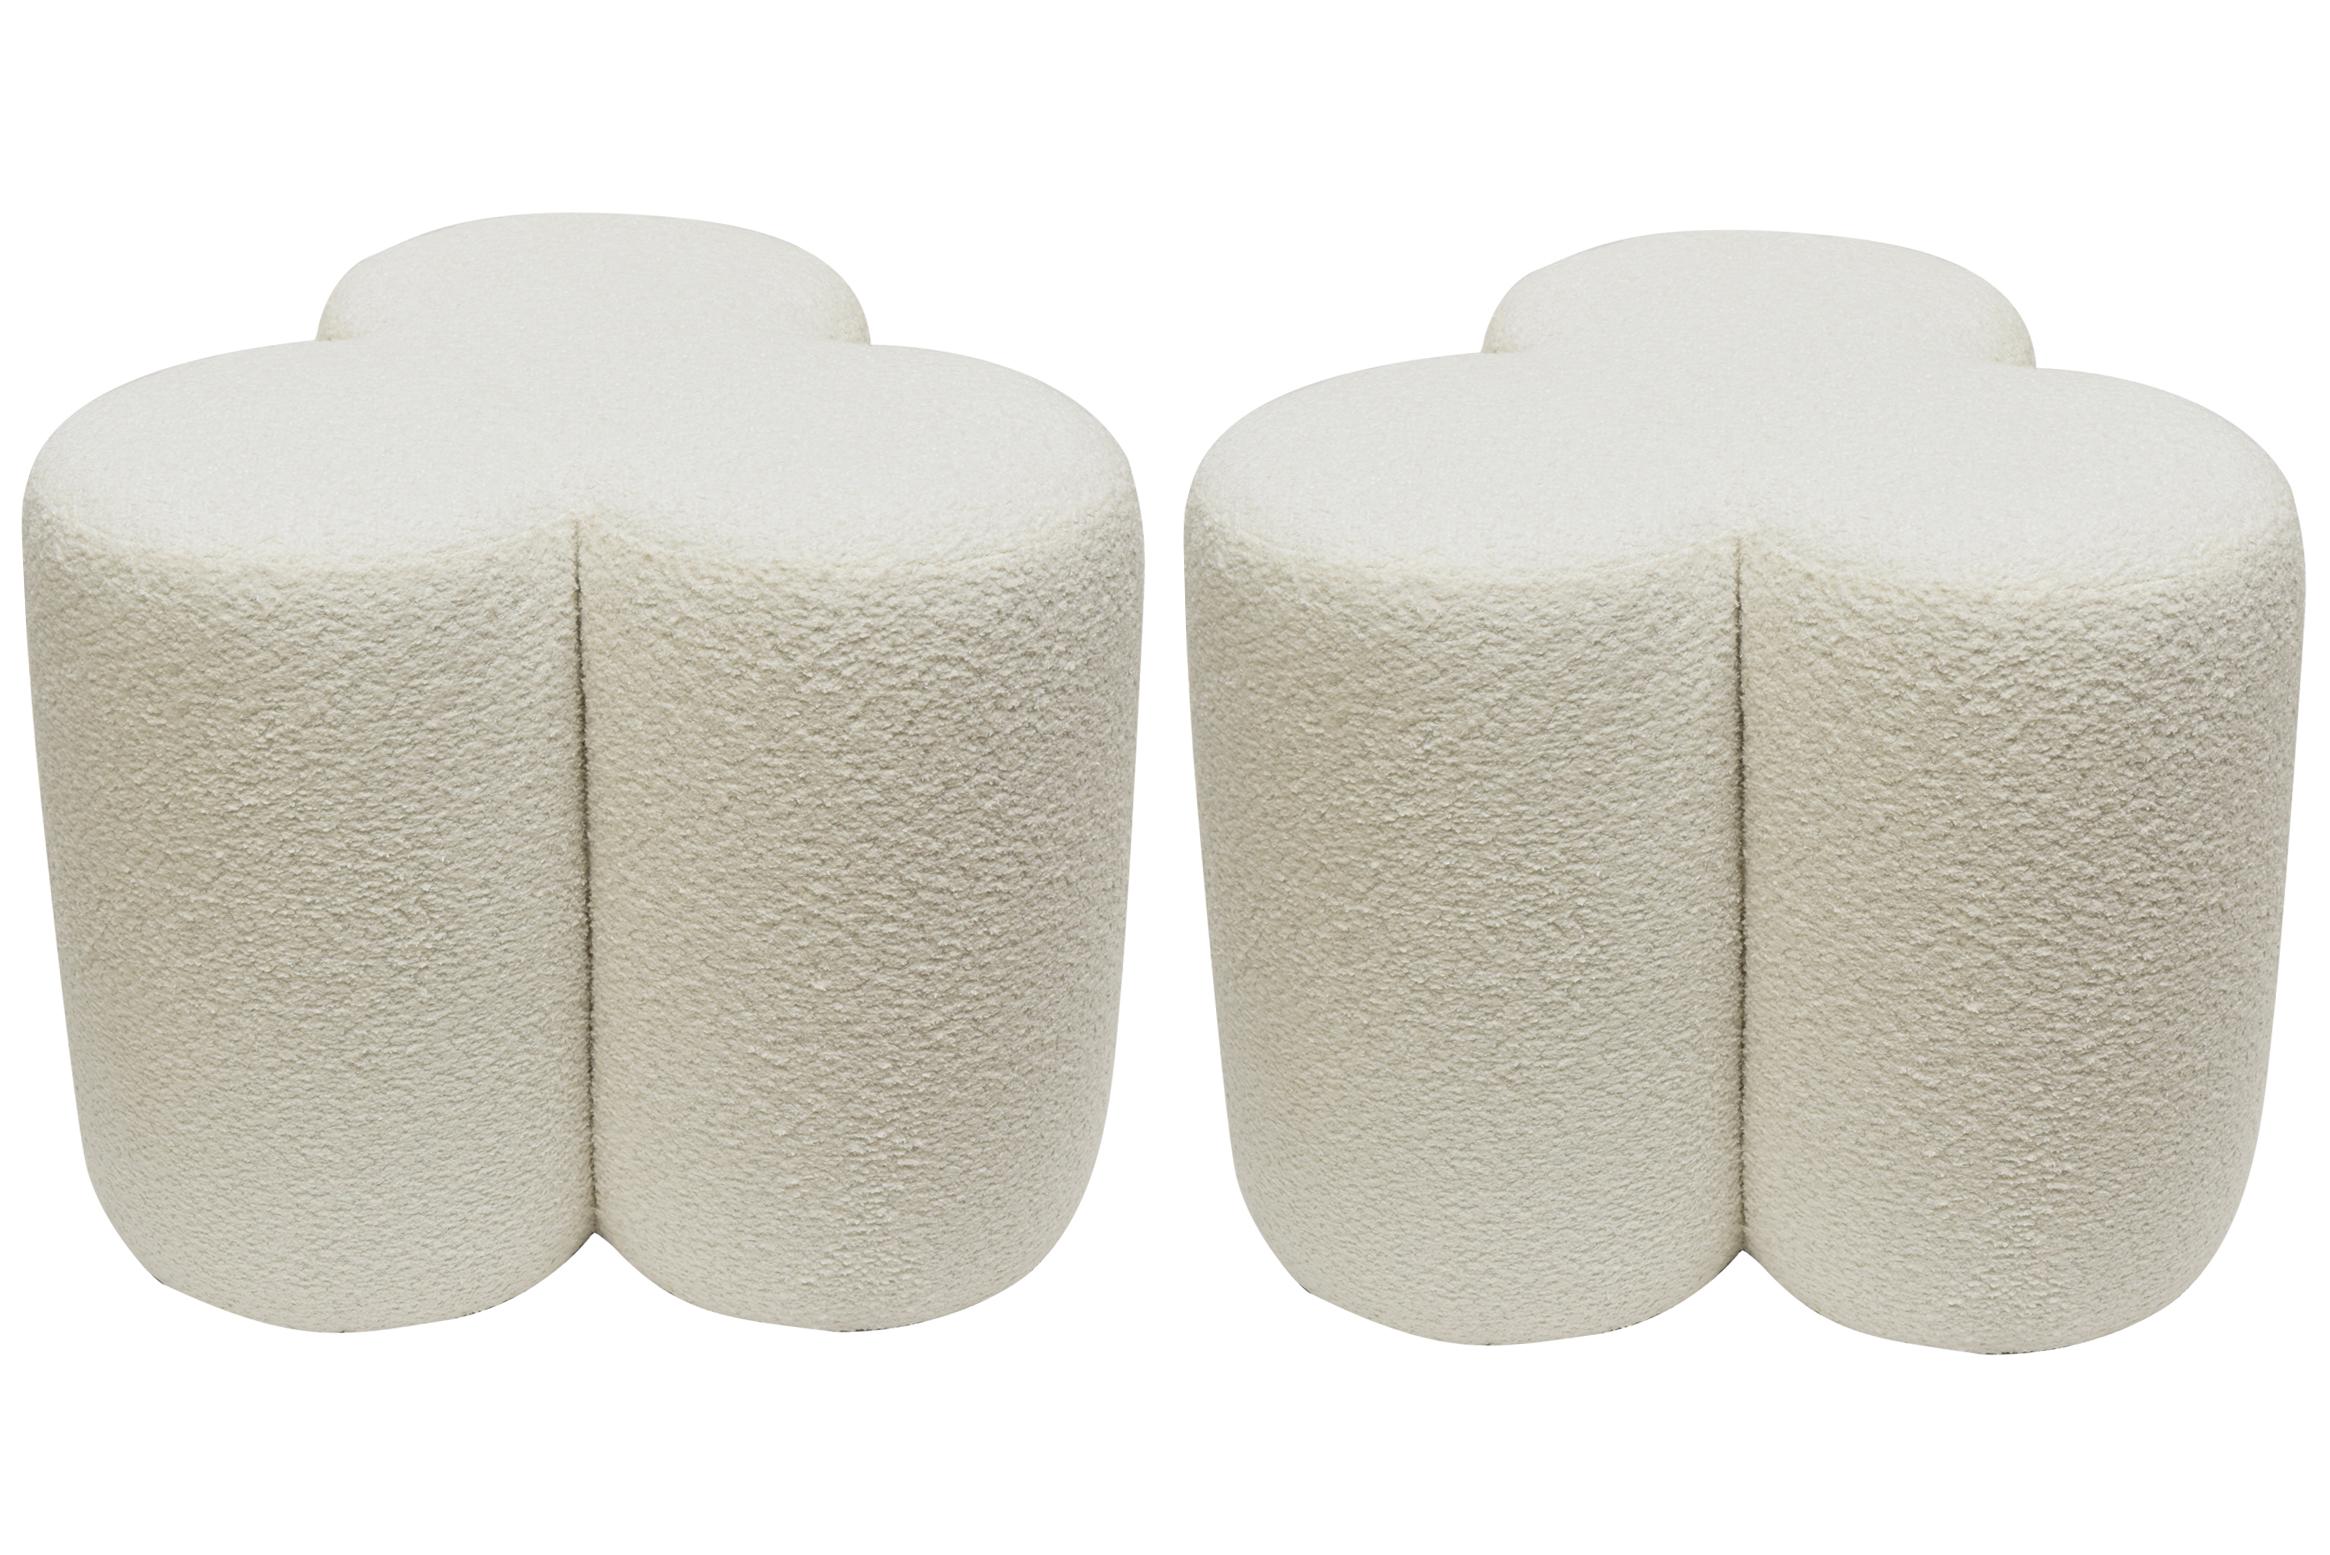 This pair of fabulous custom made limited edition modern benches or ottomans are coined the Cloud Series. They have never been used and are upholstered in a thick large off white fine boucle fabric that is so chic! The materials are wood, dacron and